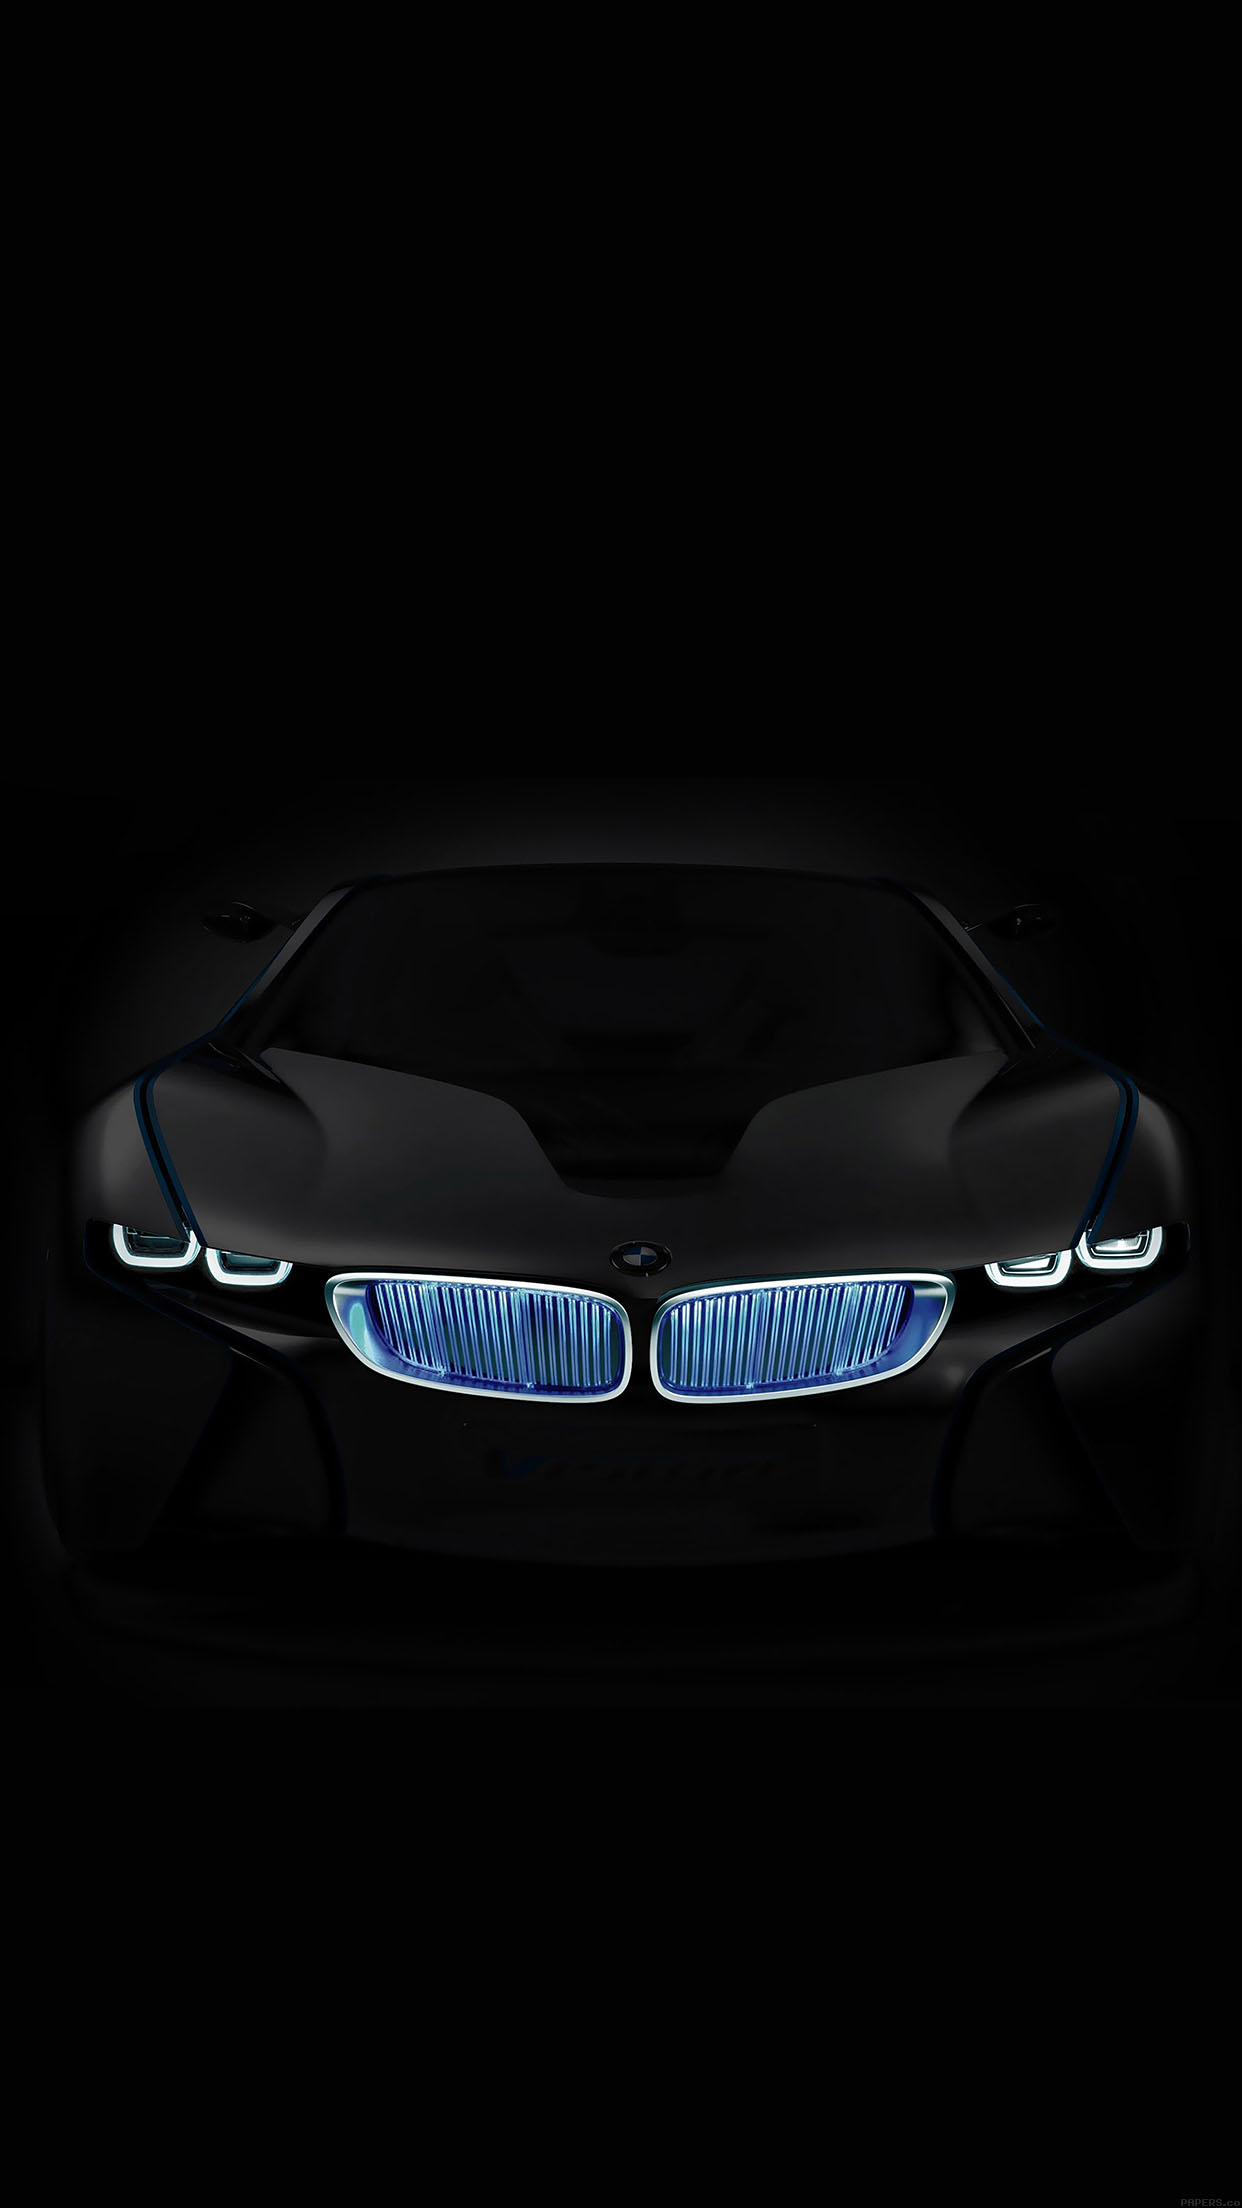 55 Hd Android Bmw Wallpapers On Wallpapersafari